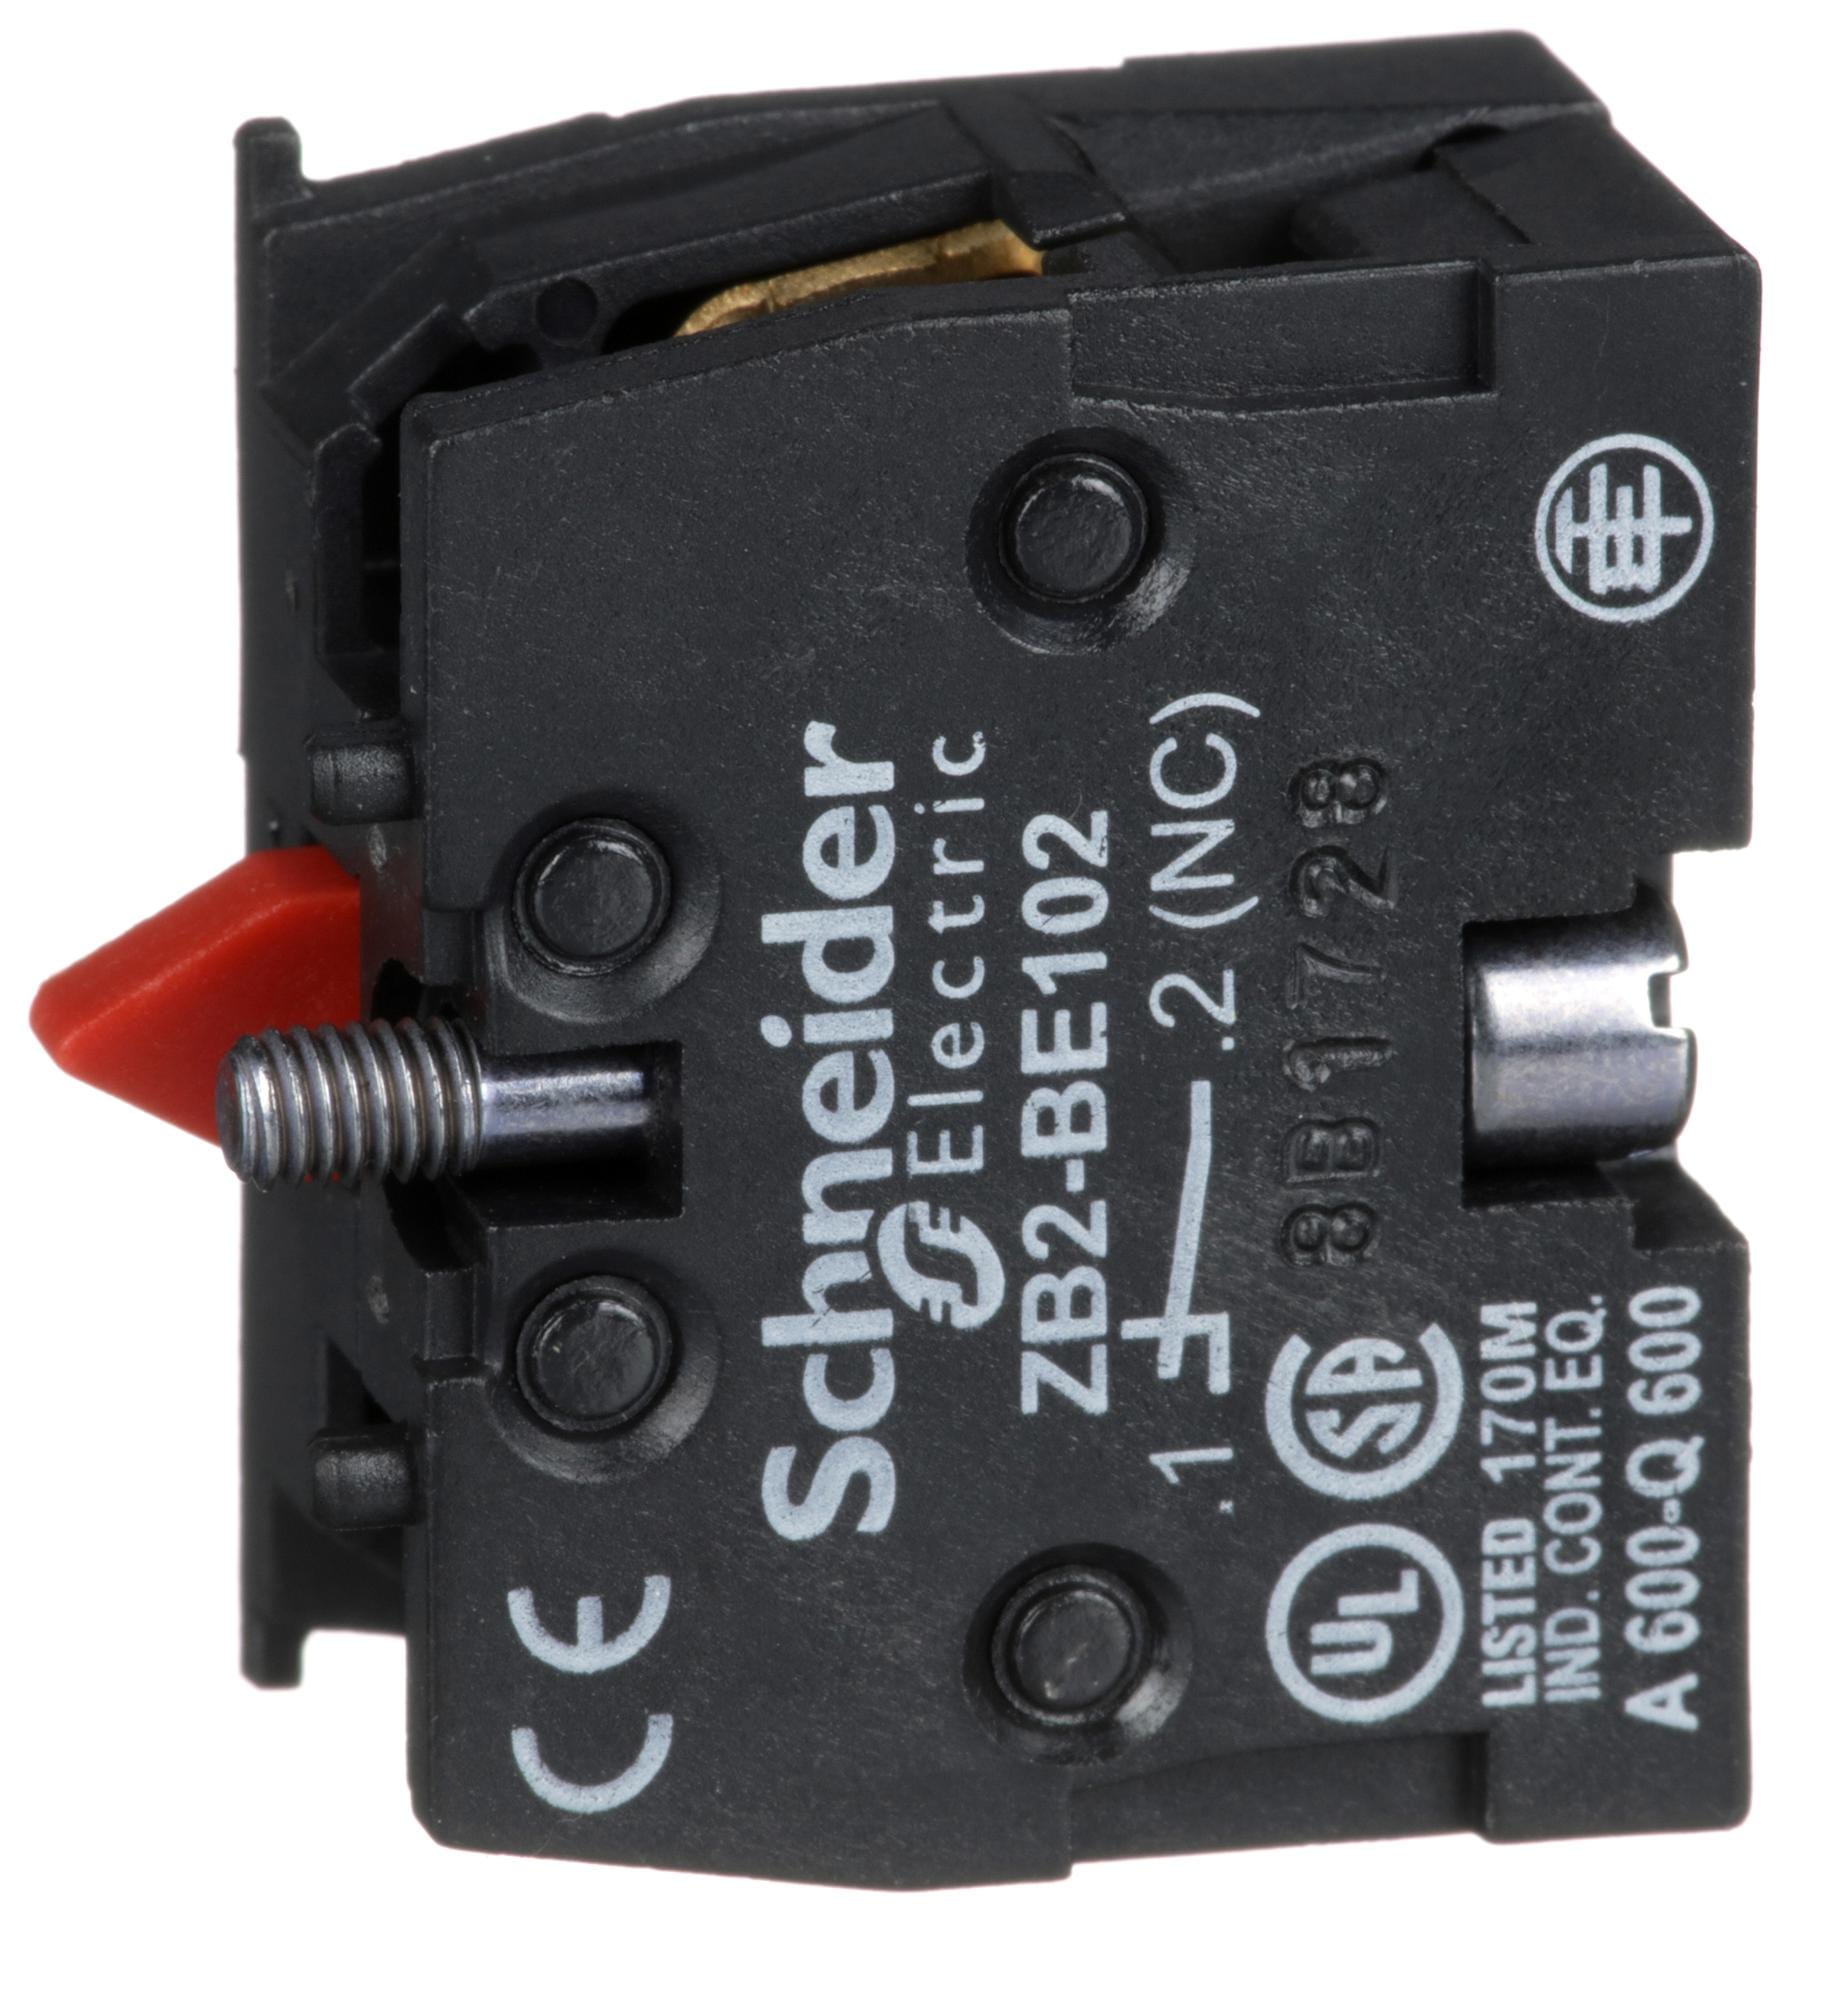 SCHNEIDER ELECTRIC Contact Blocks ZB2BE102 CONTACT BLOCK, 600V, 10A, 1POLE SCHNEIDER ELECTRIC 3114887 ZB2BE102